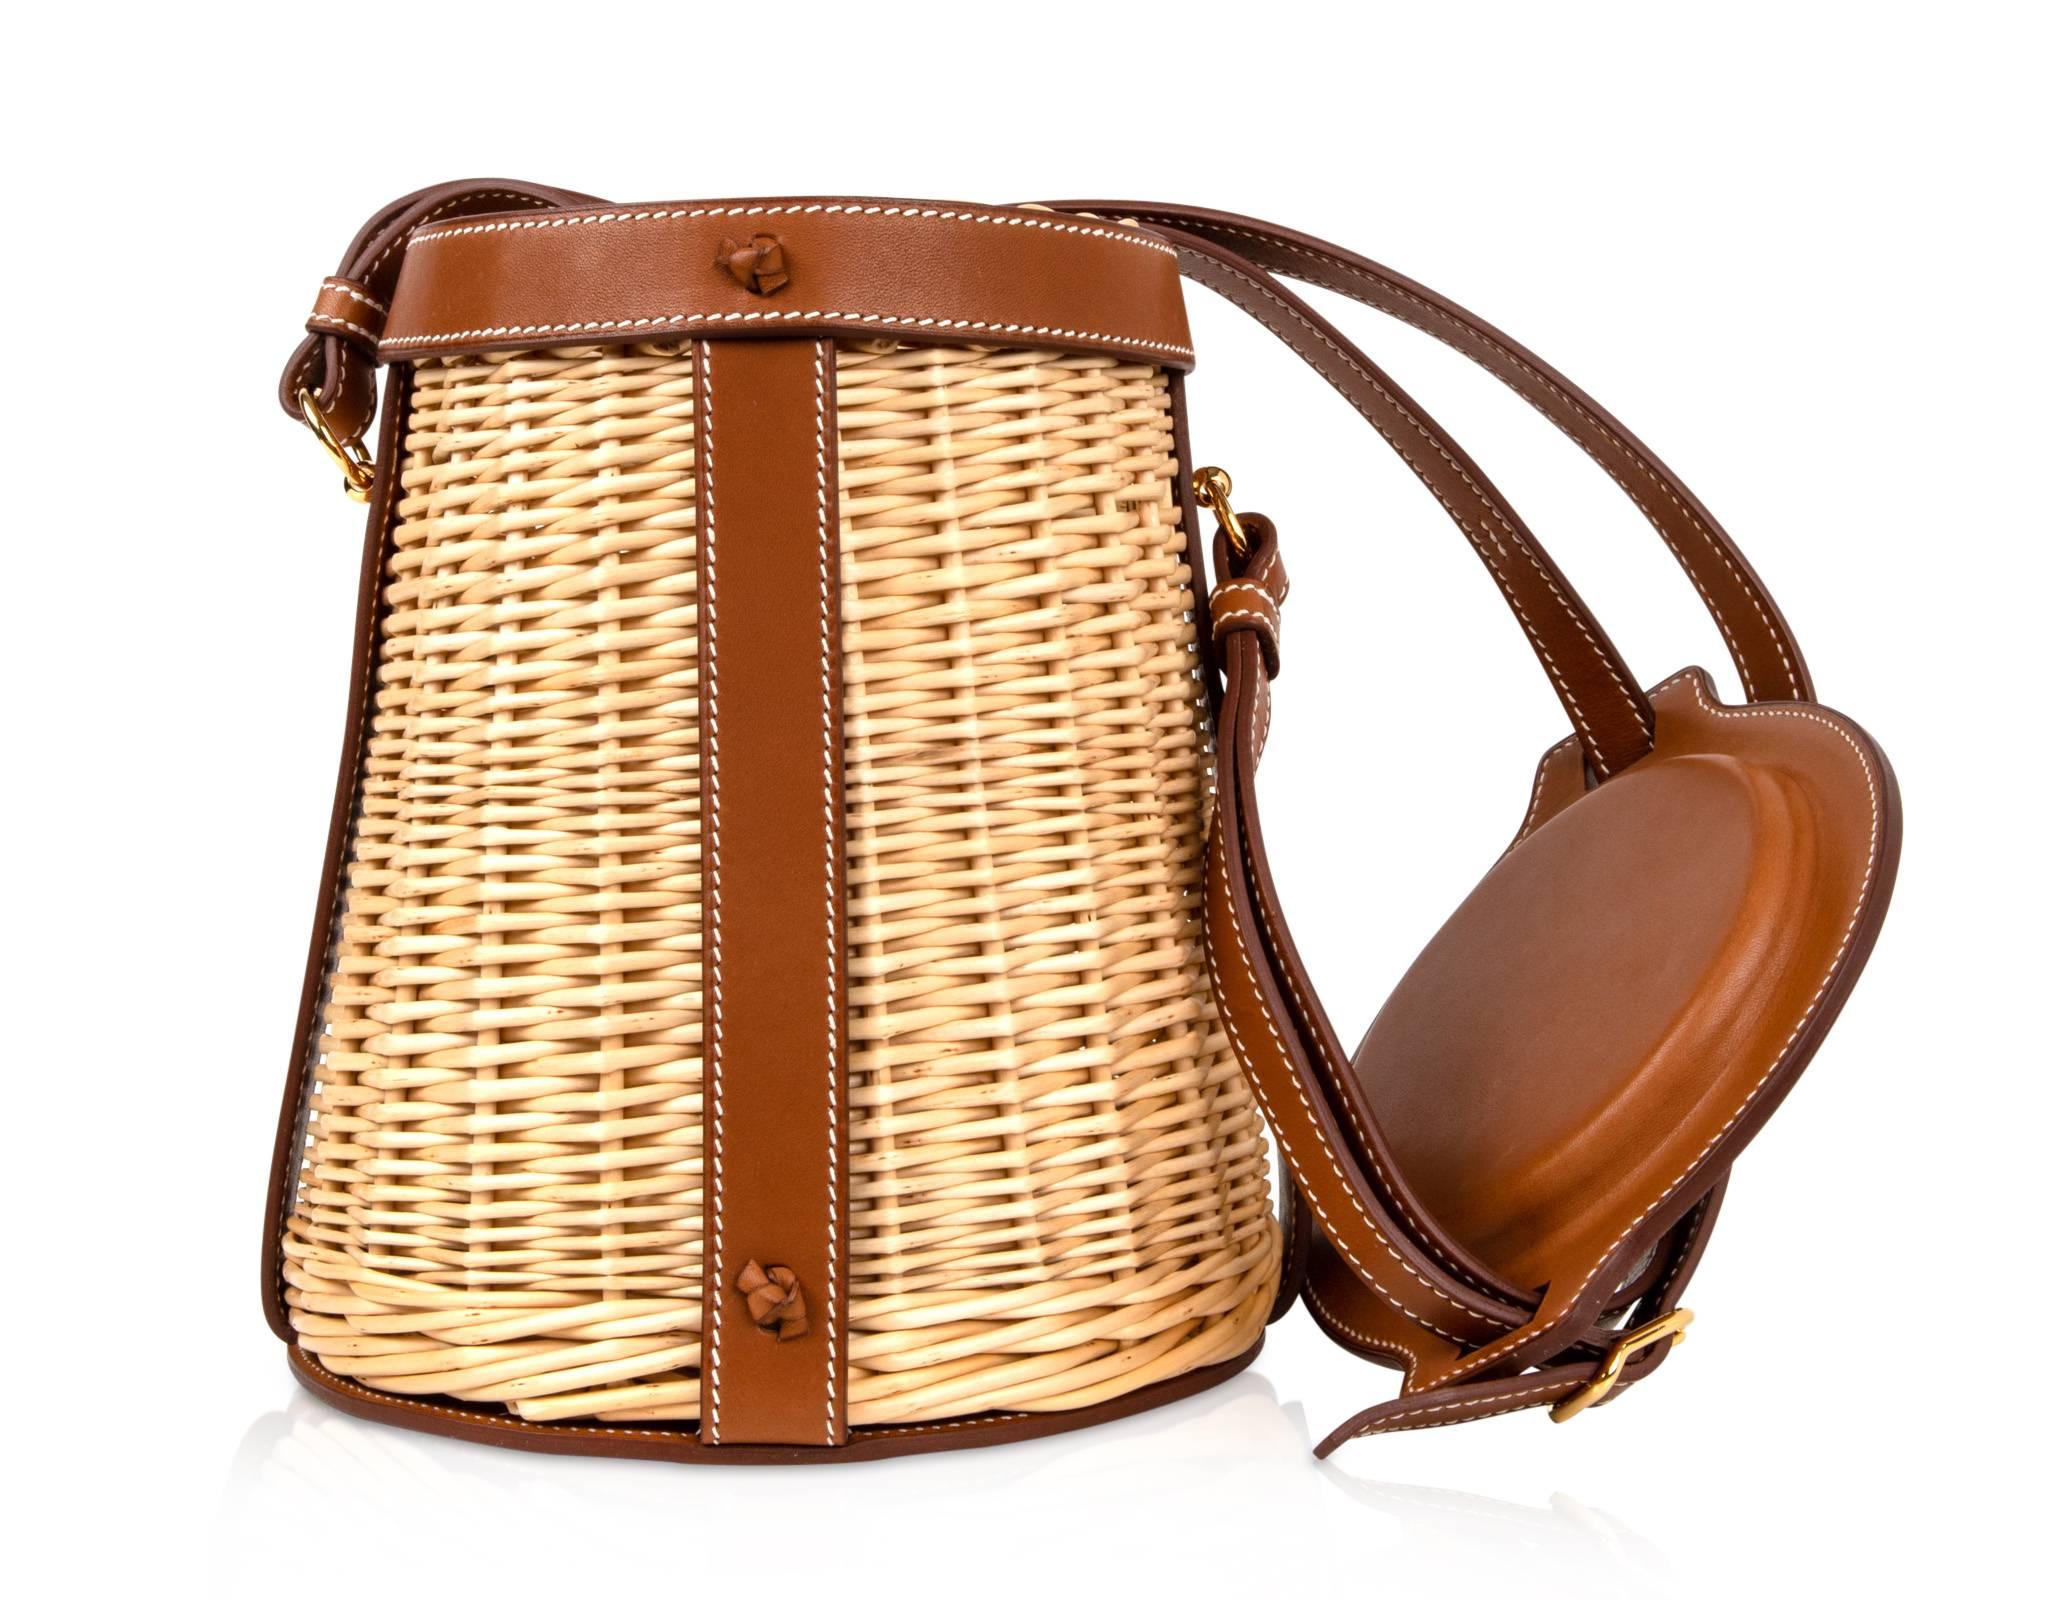 Hermes Farming Picnic Bag Osier (Wicker) Barenia Rare Limited Edition created Spring/Summer 2015.
The ultimate chic bag for any summer day - dress her up or down.
Beautifully accented with coveted Barenia leather with signature bone top